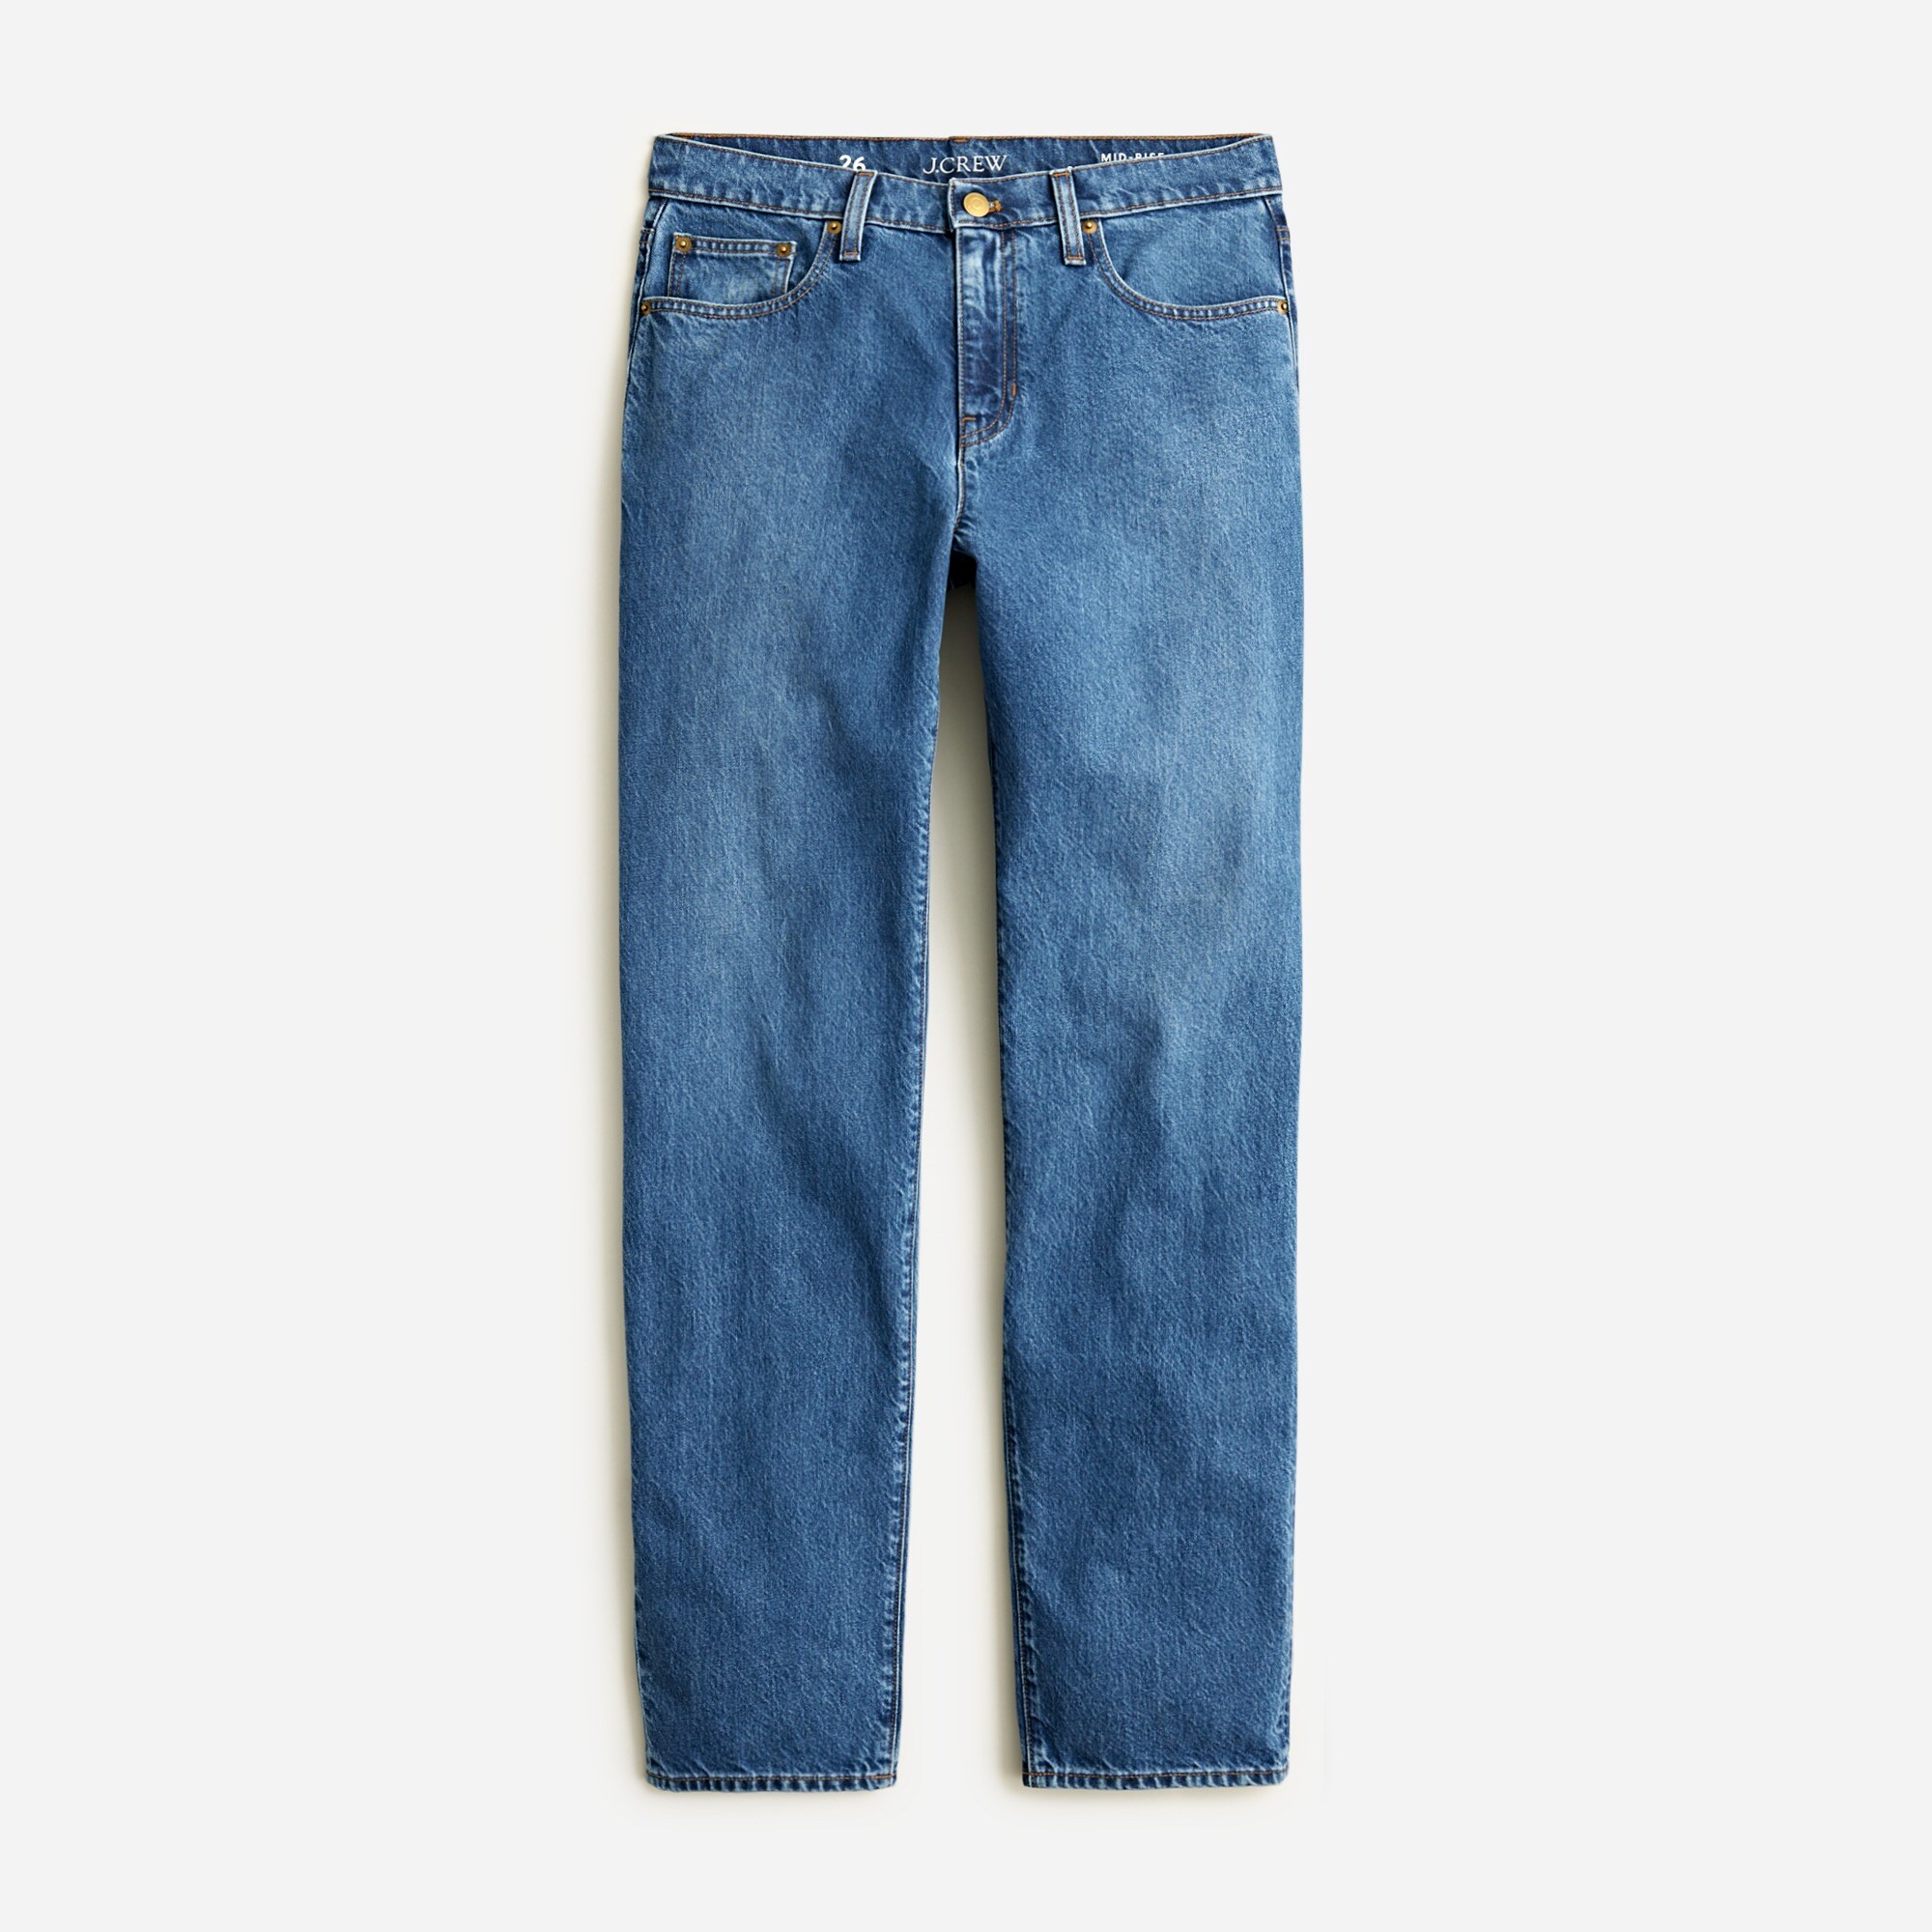  Petite slouchy-straight jean in Turney wash